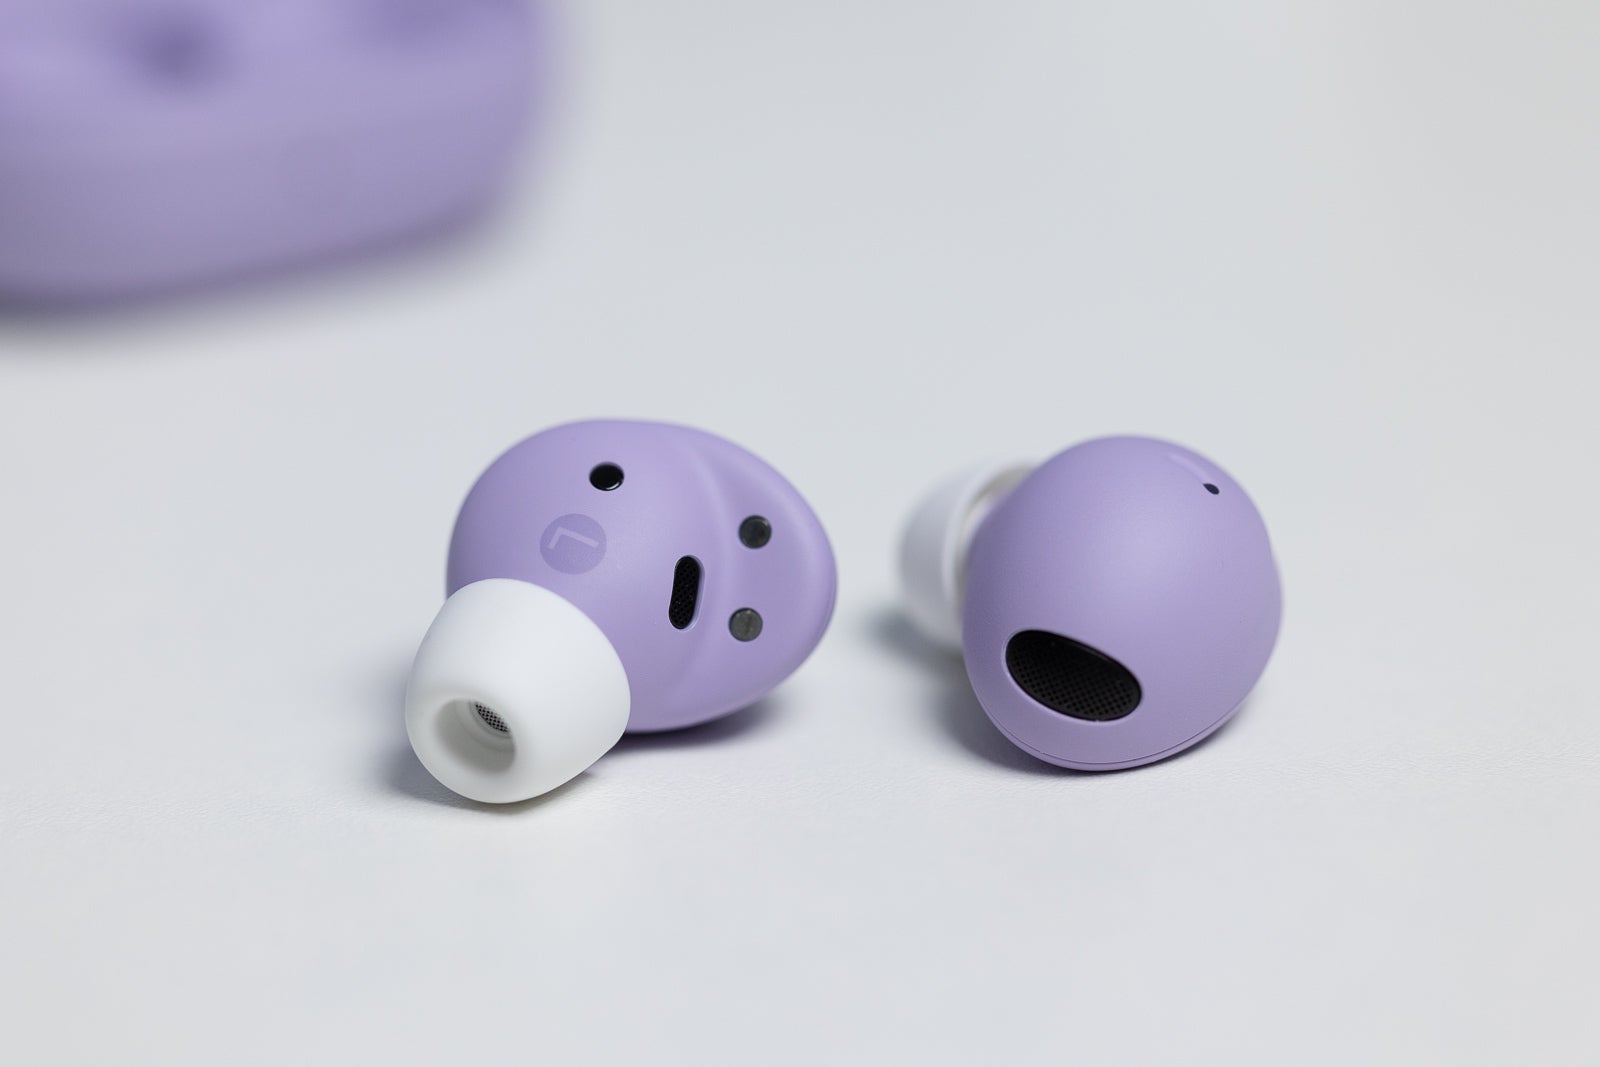 (Image credit - PhoneArena) Galaxy Buds 2 Pro earbuds, close up - Galaxy Buds 2 Pro review: Sleeker design, but is it worth the price jump?